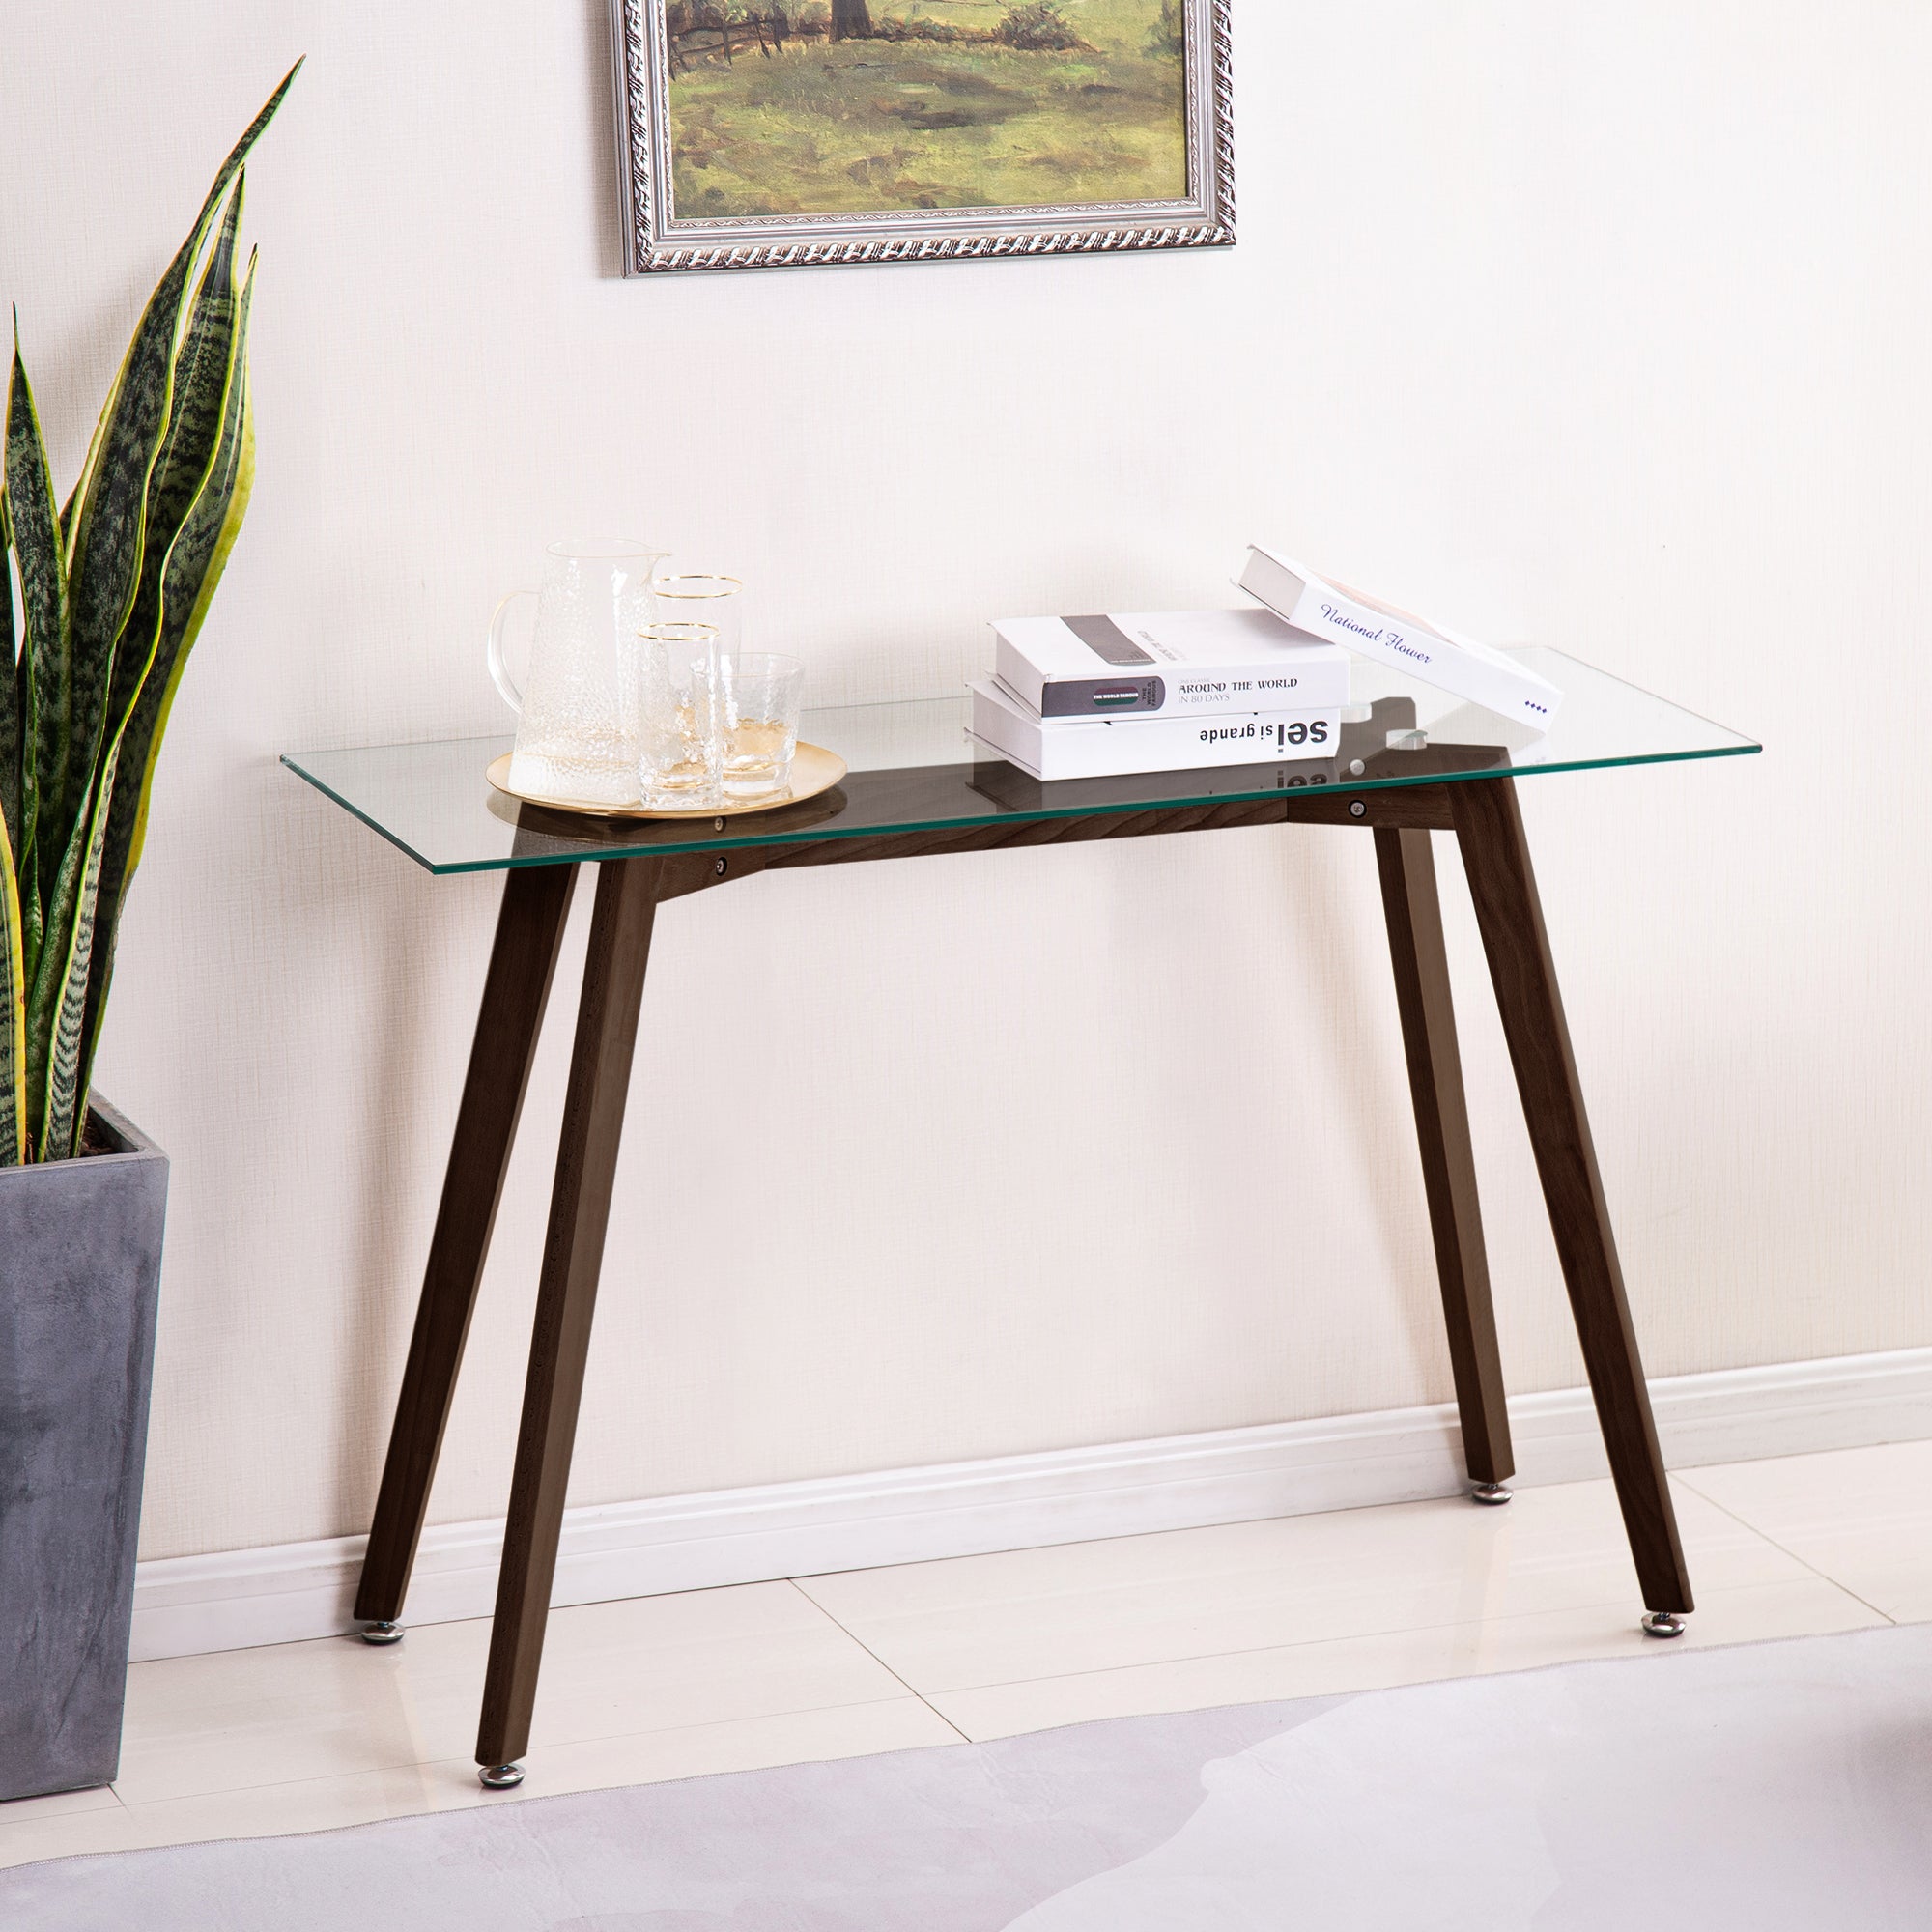 Ivinta Glass Console Table, Narrow Sofa Table for Small Space, Entryway Table for Hallway